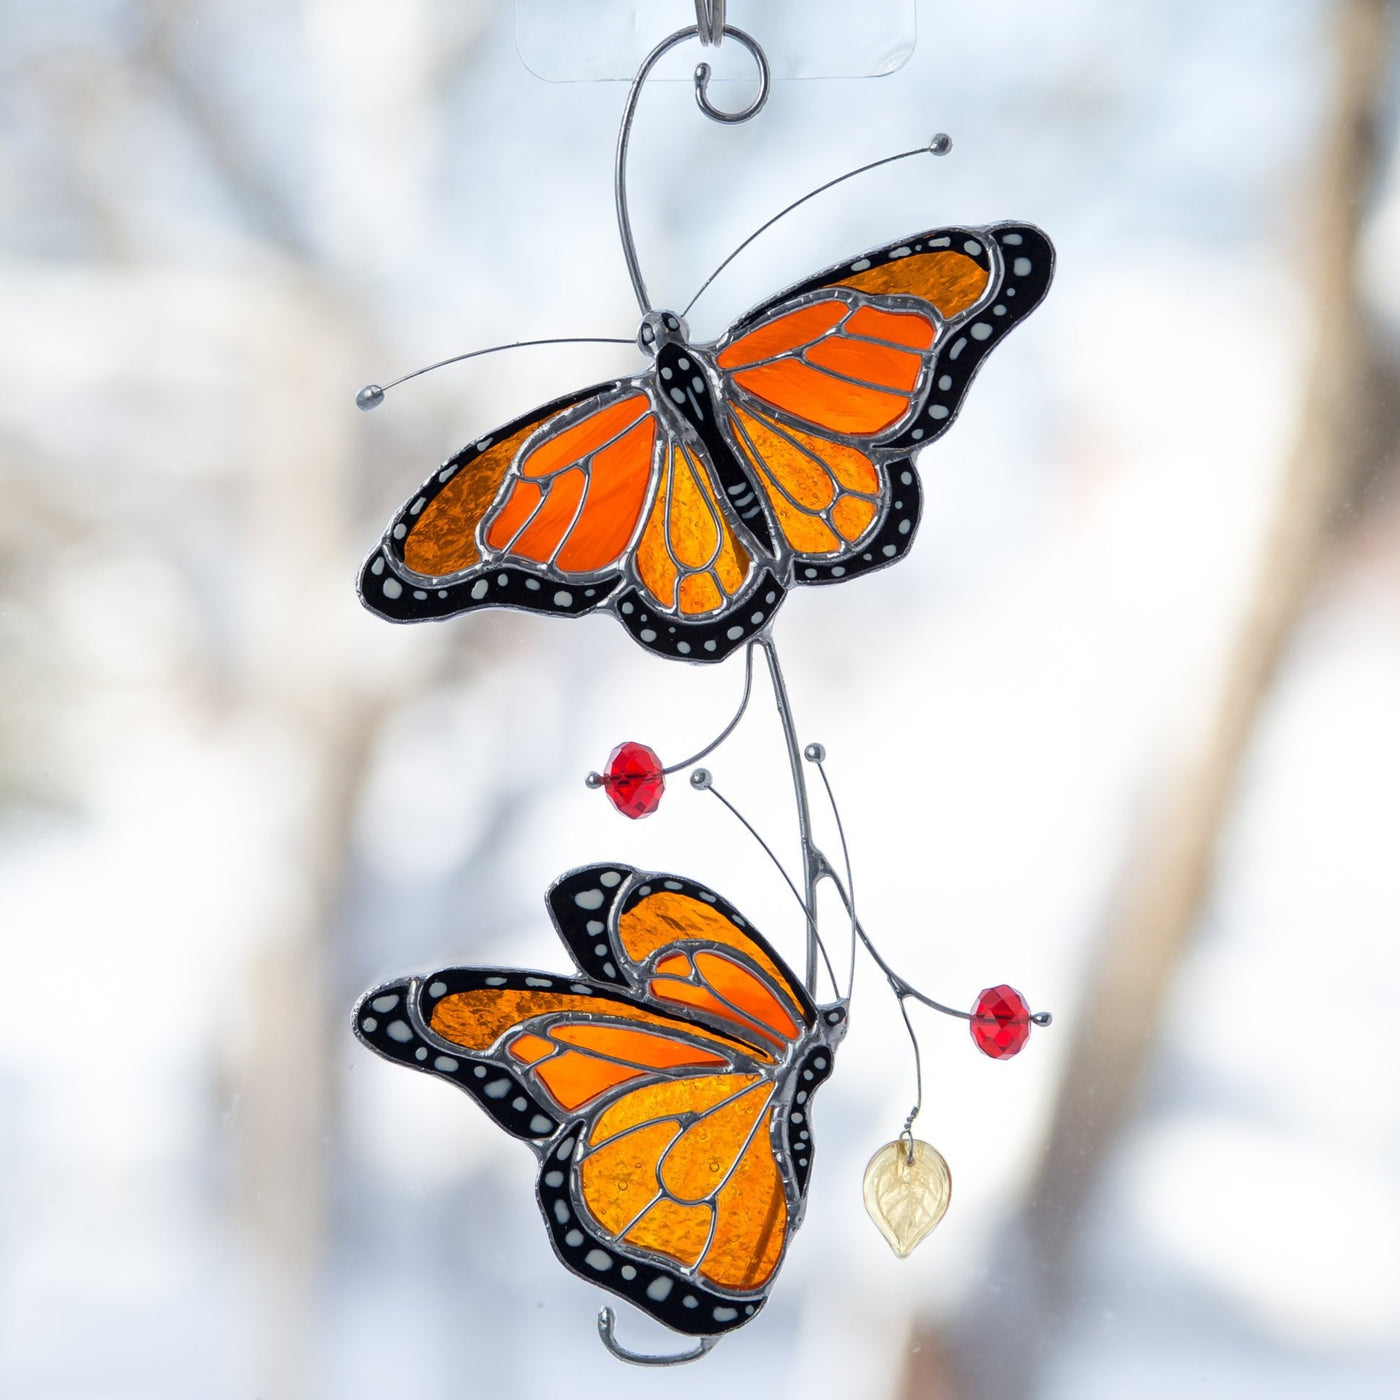 Stained glass suncatcher of orange monarch butterflies siting on the branch